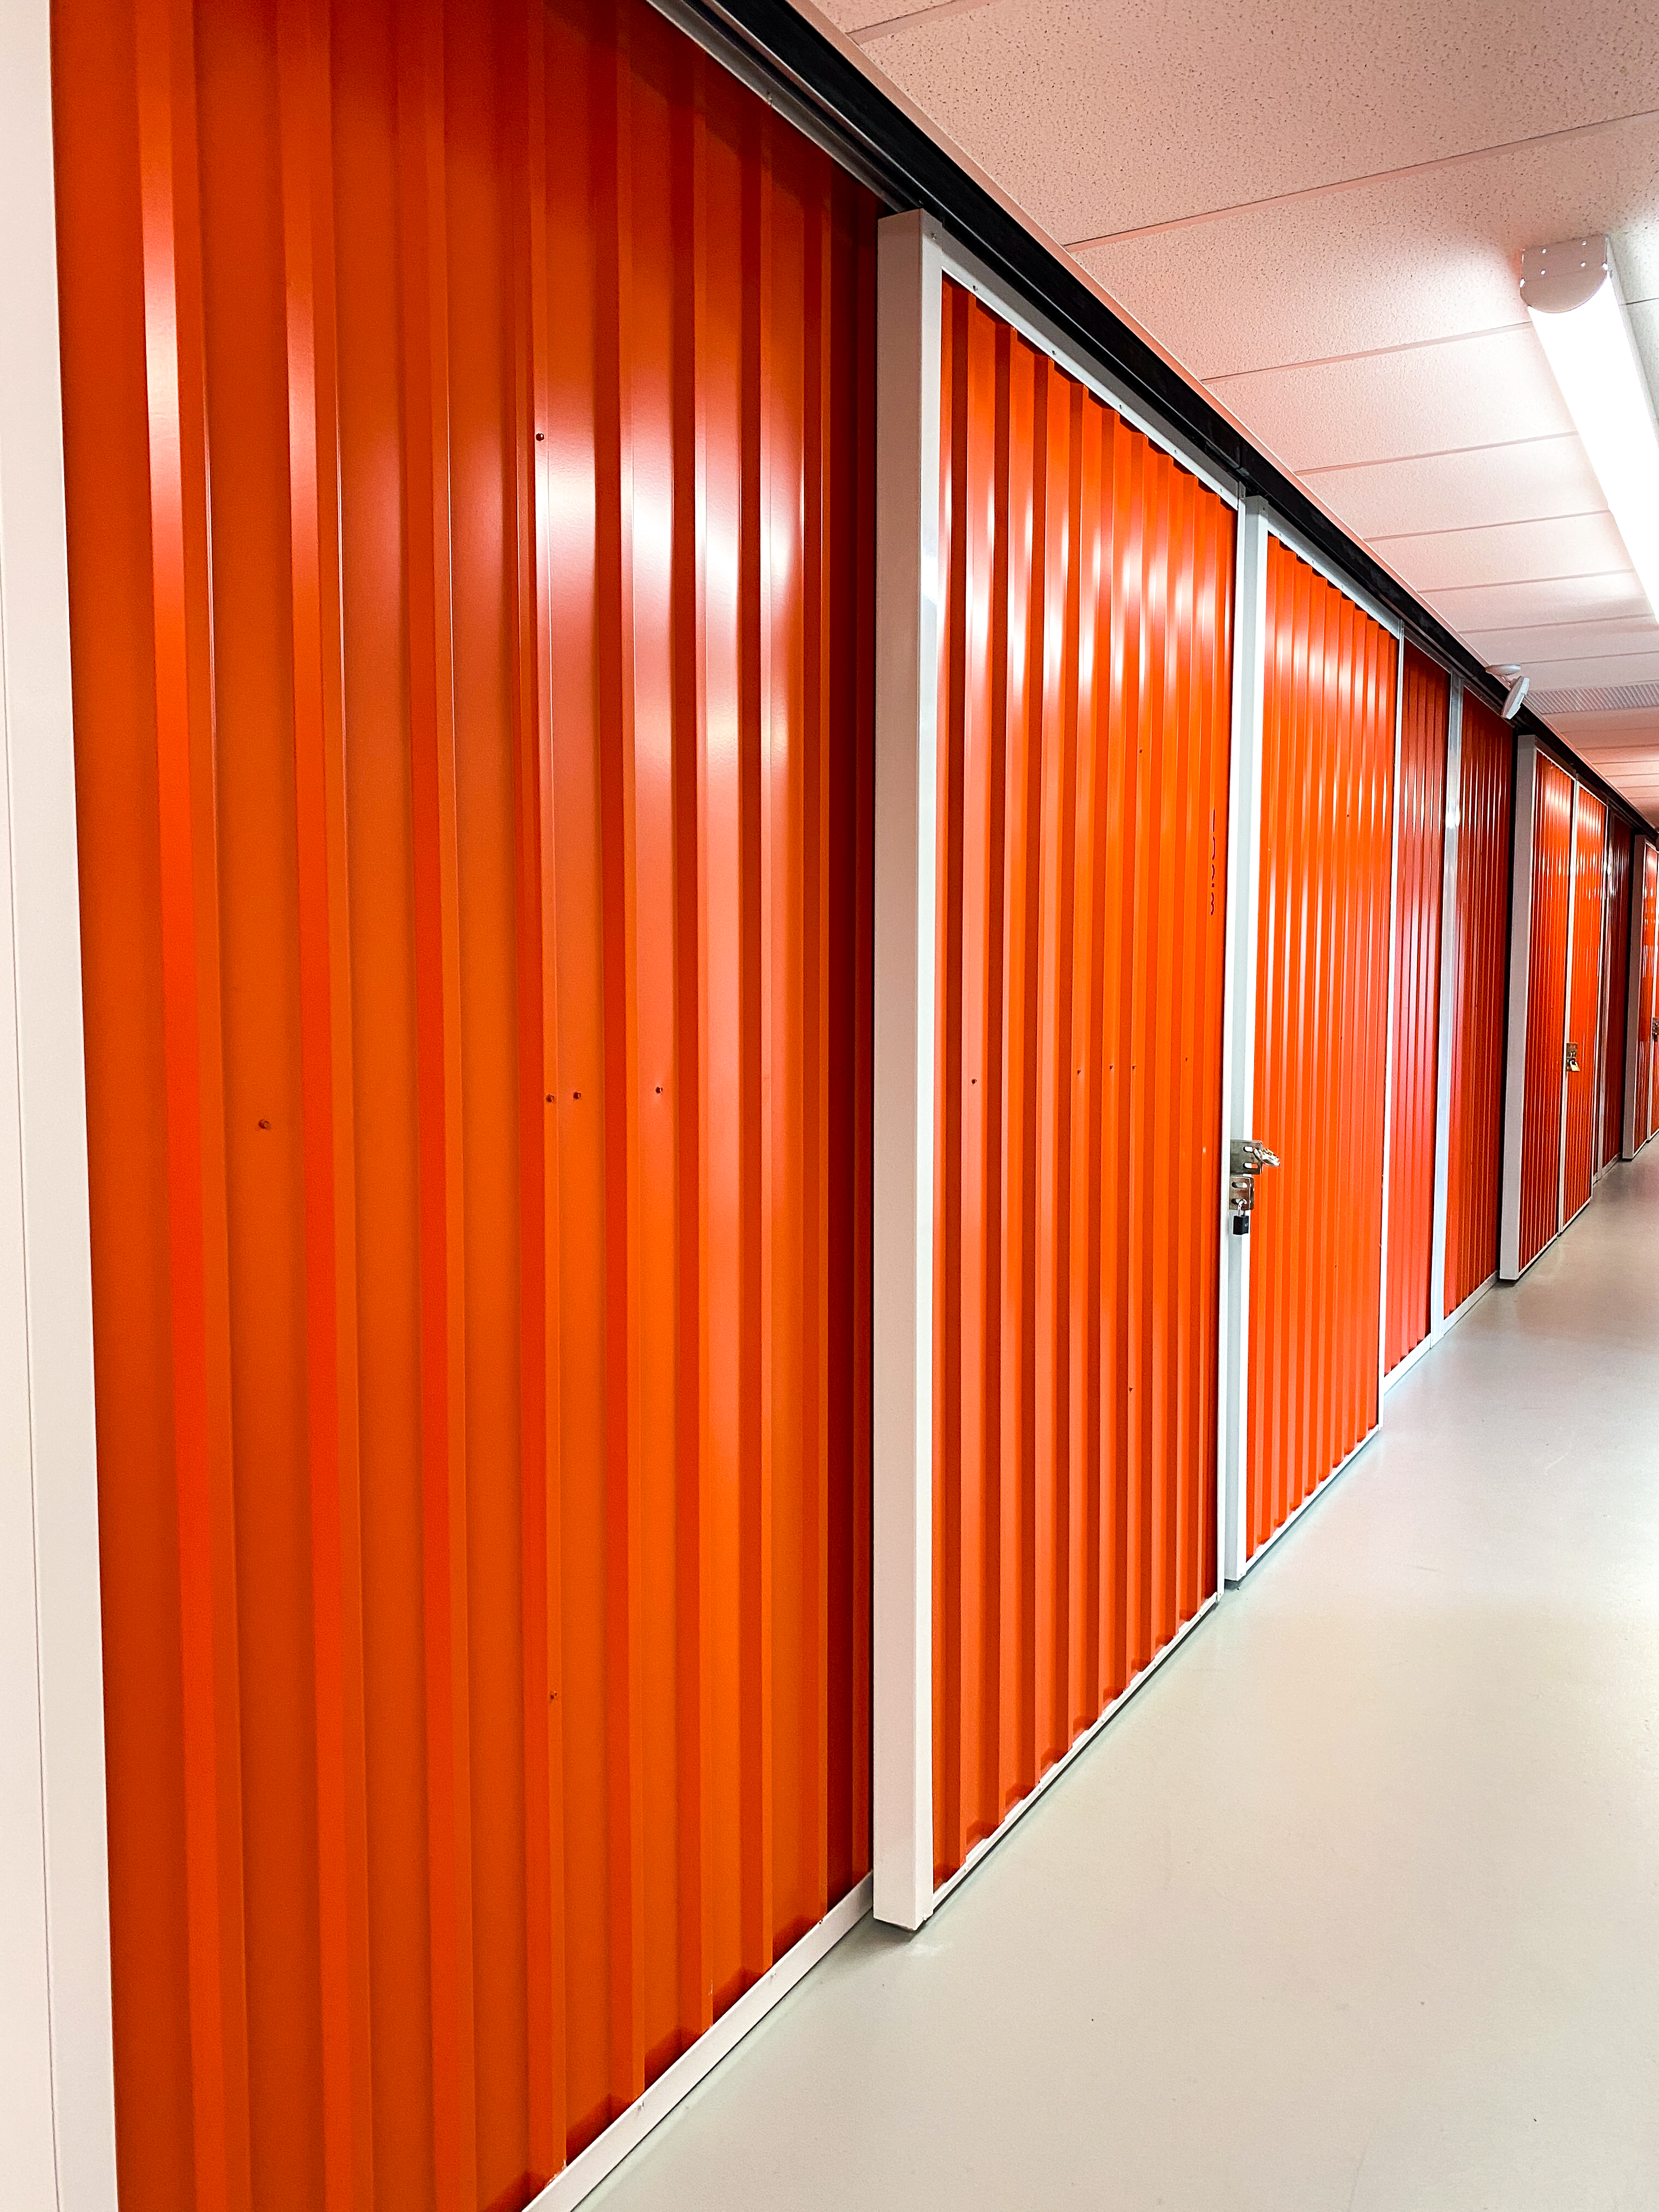 A clean, well-lit hallway with orange sliding storage unit doors on both sides, leading to the back of the facility.